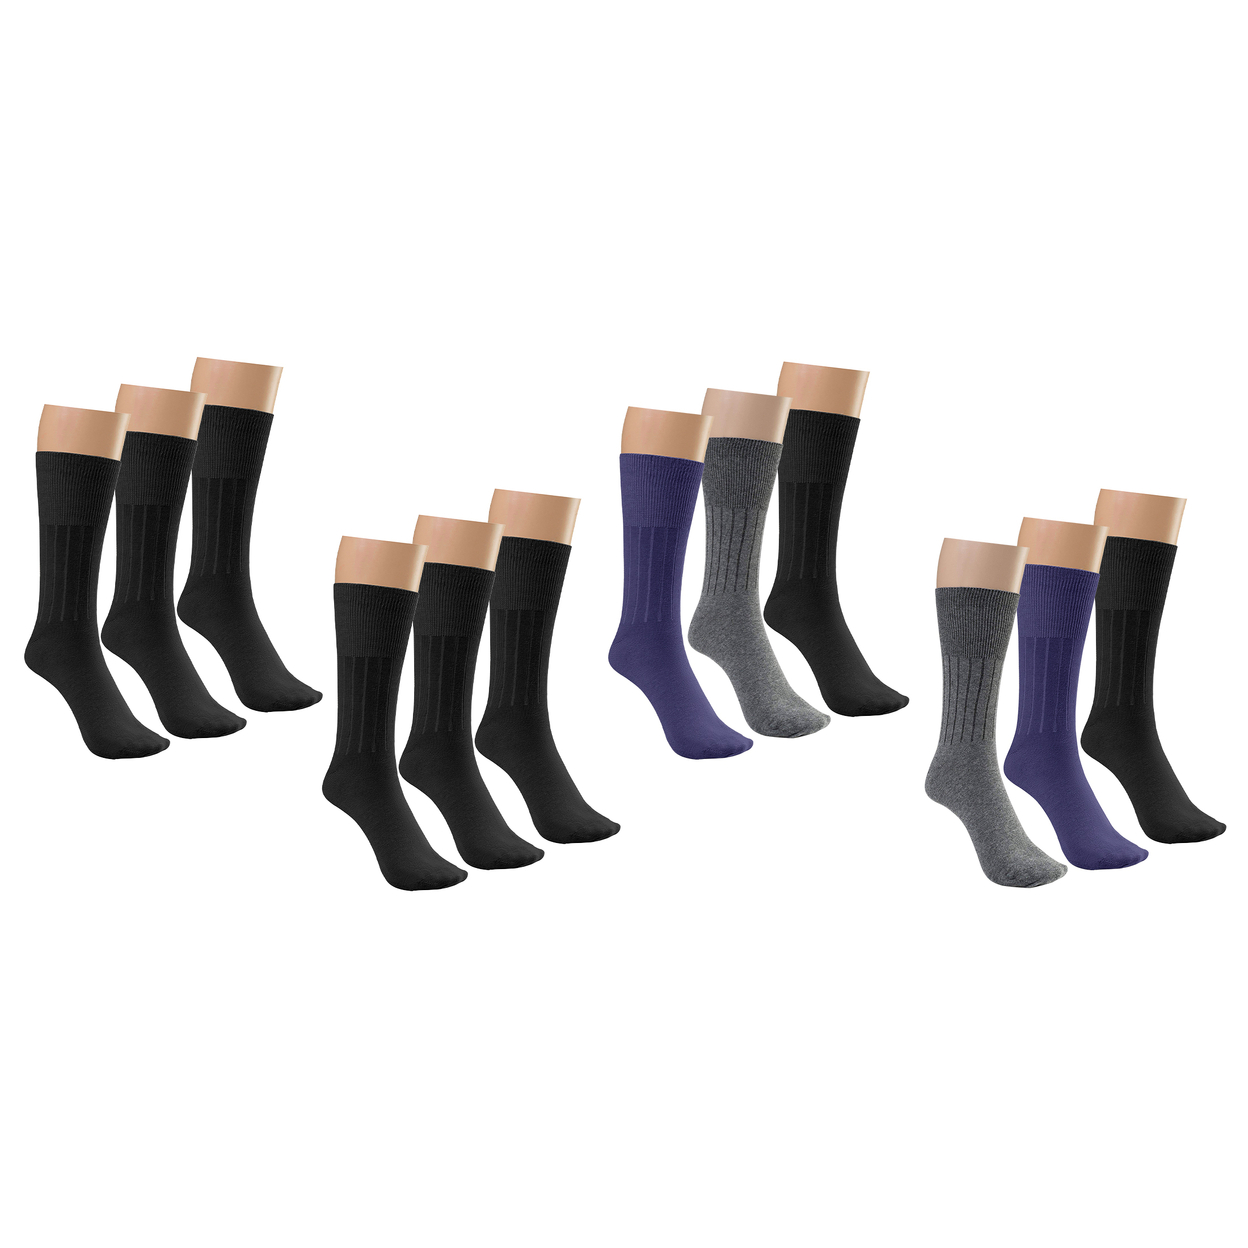 12-Pairs: Physician Approved Non-Binding Diabetic Circulatory Comfortable Moisture Wicking Dress Socks - Assorted